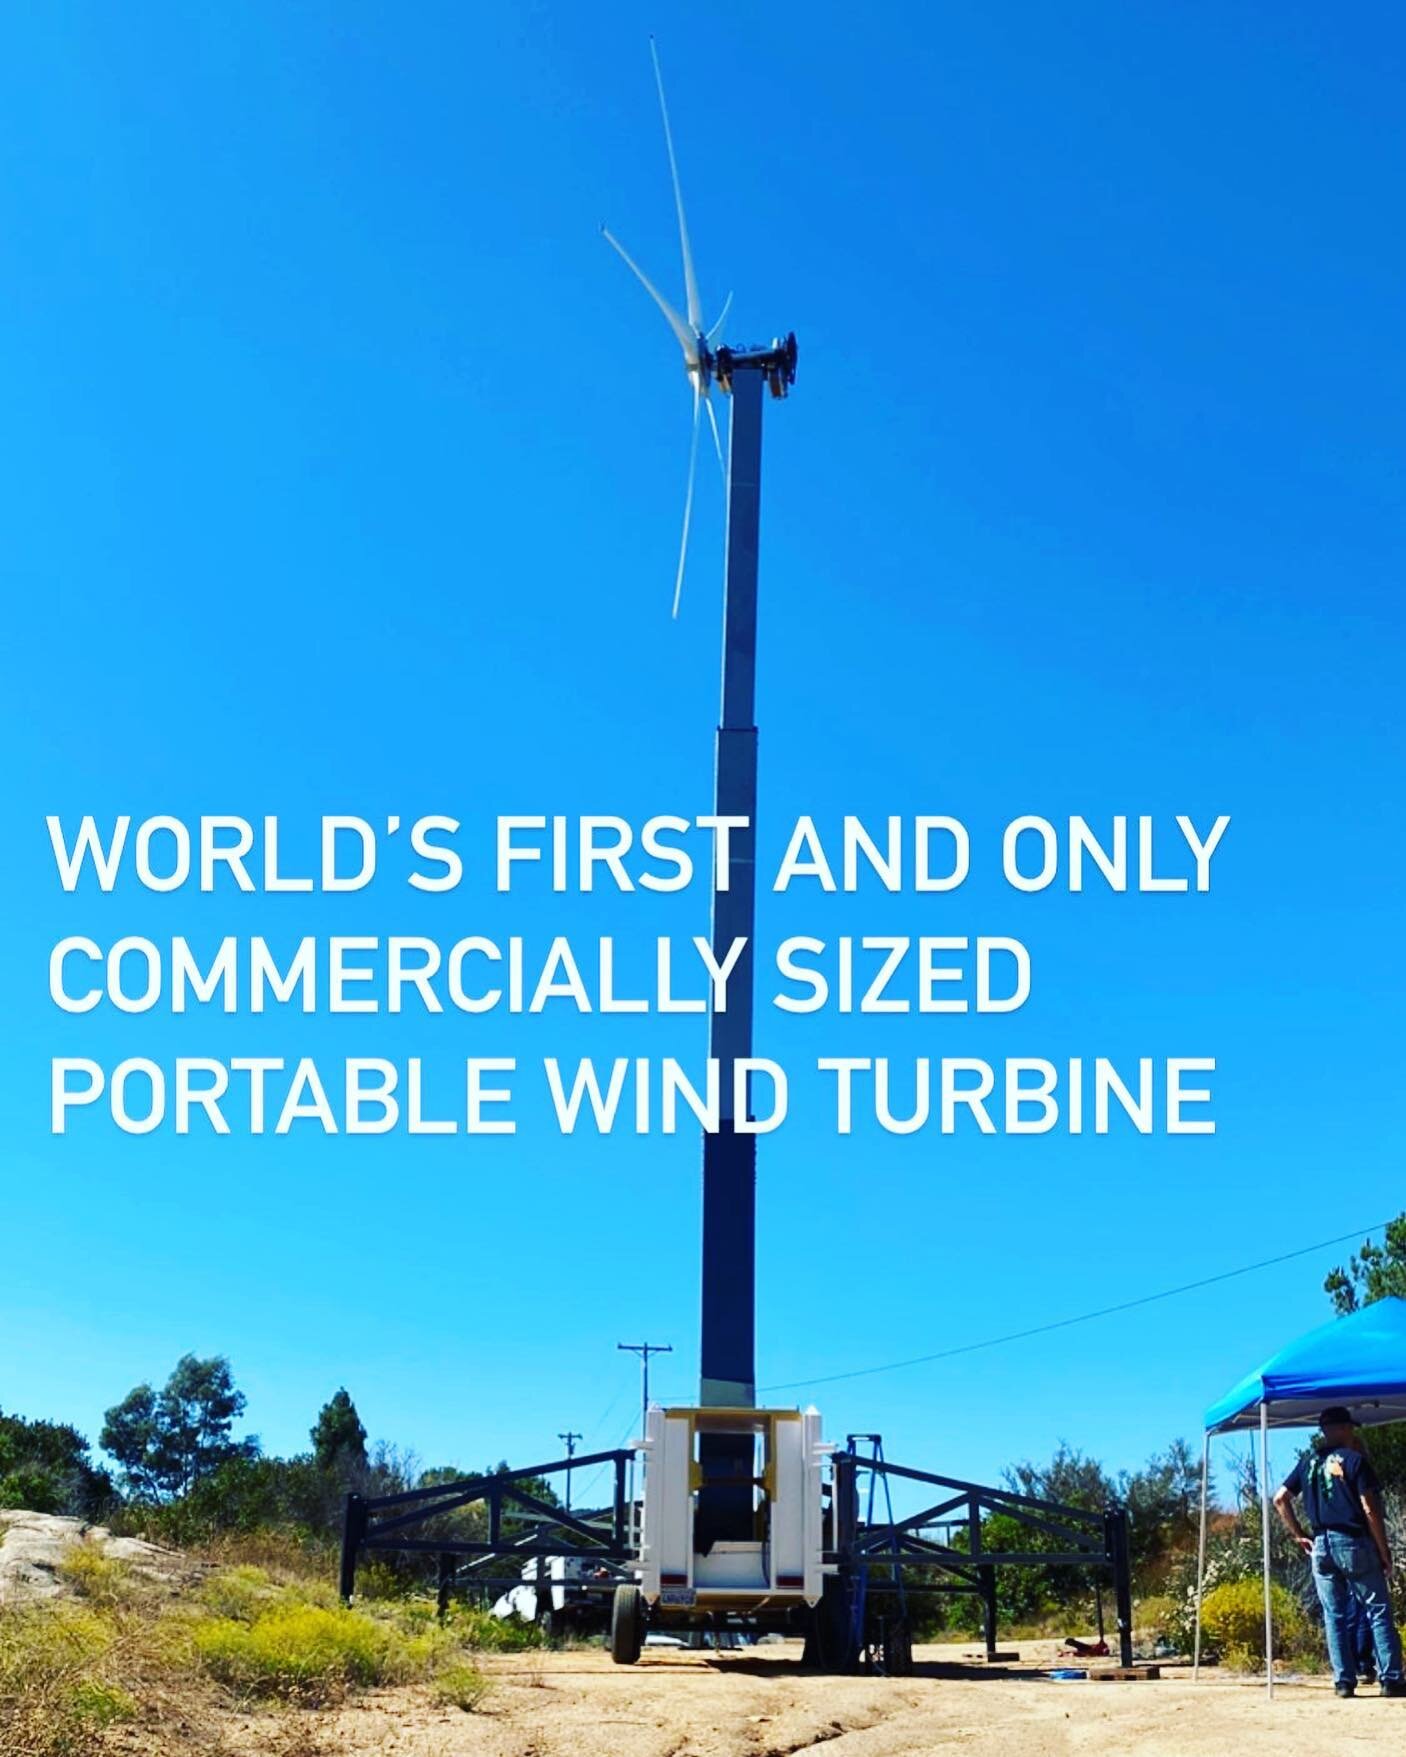 The portability of our 10kW #windturbine is the most obvious novel feature but it&rsquo;s the performance of the system, particularly in low wind speeds, that really sets this #distributedenergy resource apart.
.
.
.
#windpower #windenergy #offgrid #